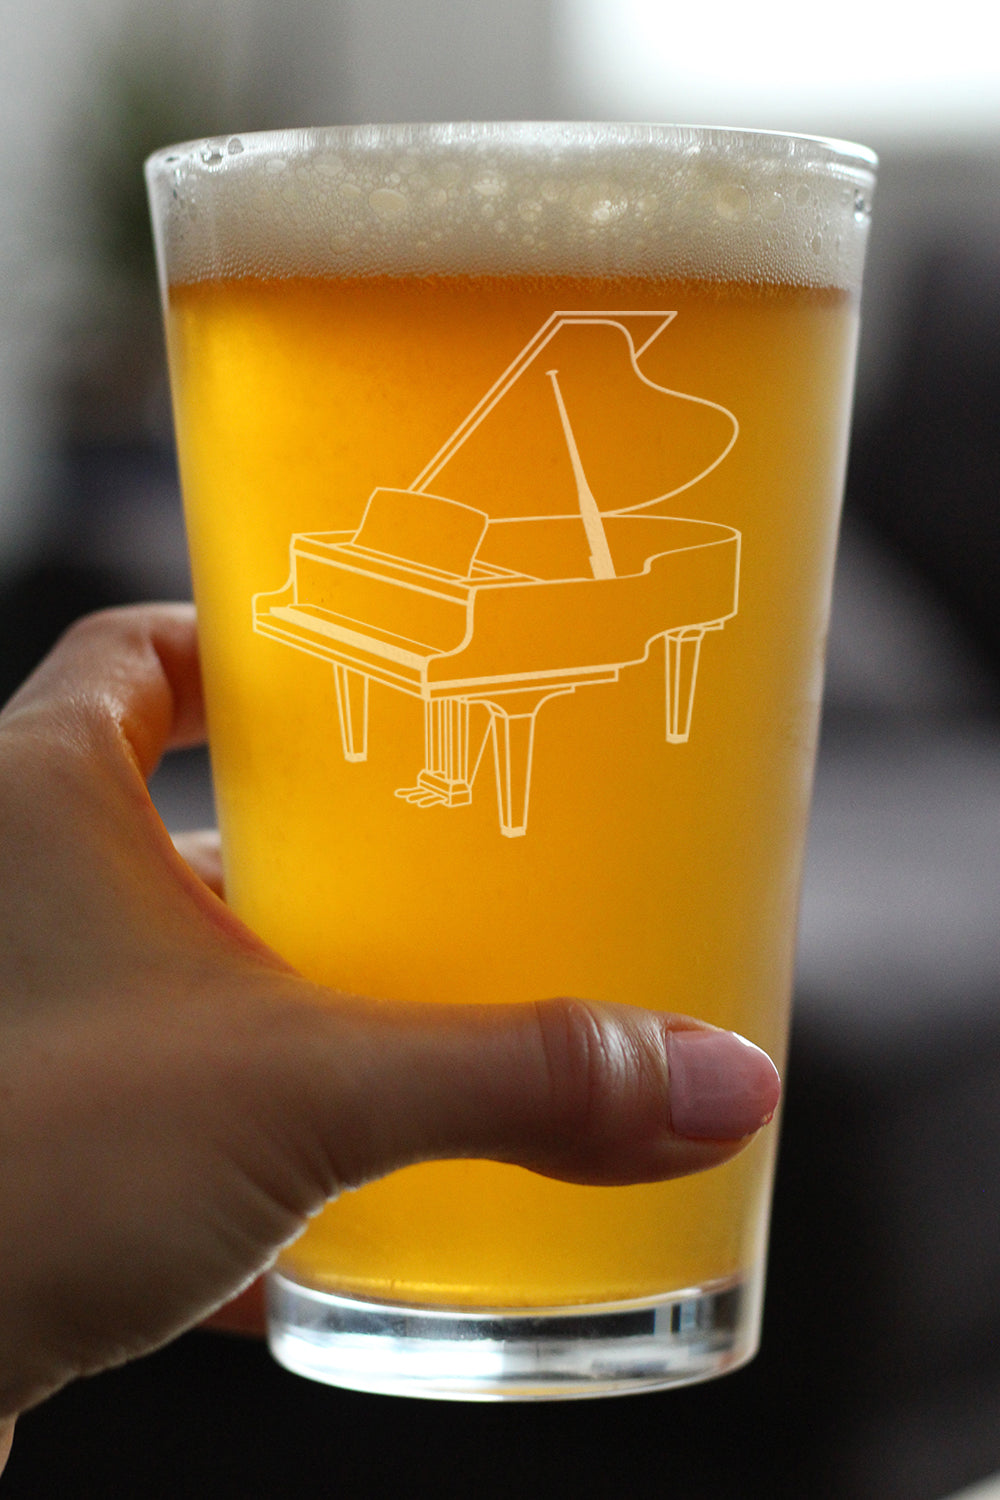 Grand Piano Pint Glass for Beer - Music Gifts for Piano Players, Teachers and Musical Accessories for Musicians that Play Keys - 16 Oz Glasses